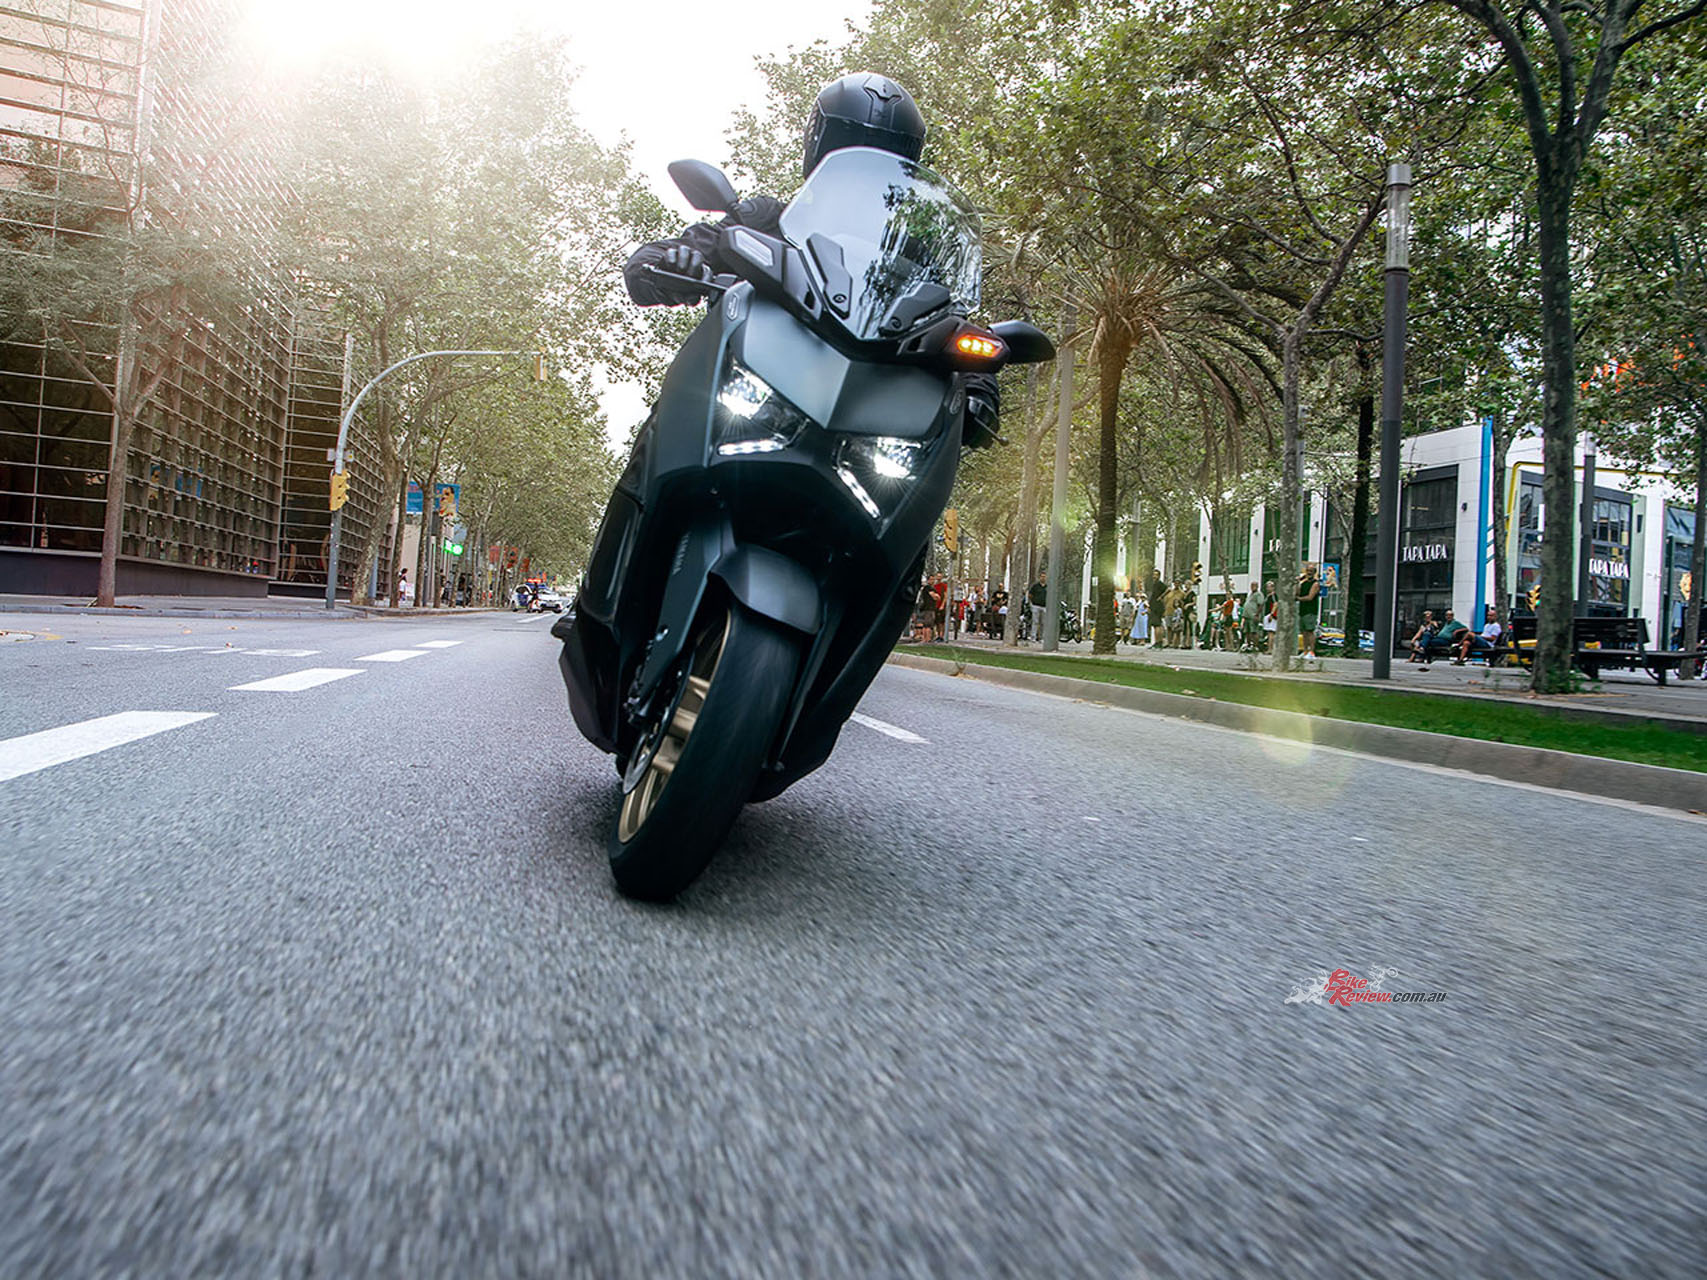 Riders can compare themselves with other Yamaha users in terms of distance ridden and how eco-friendly their riding is.